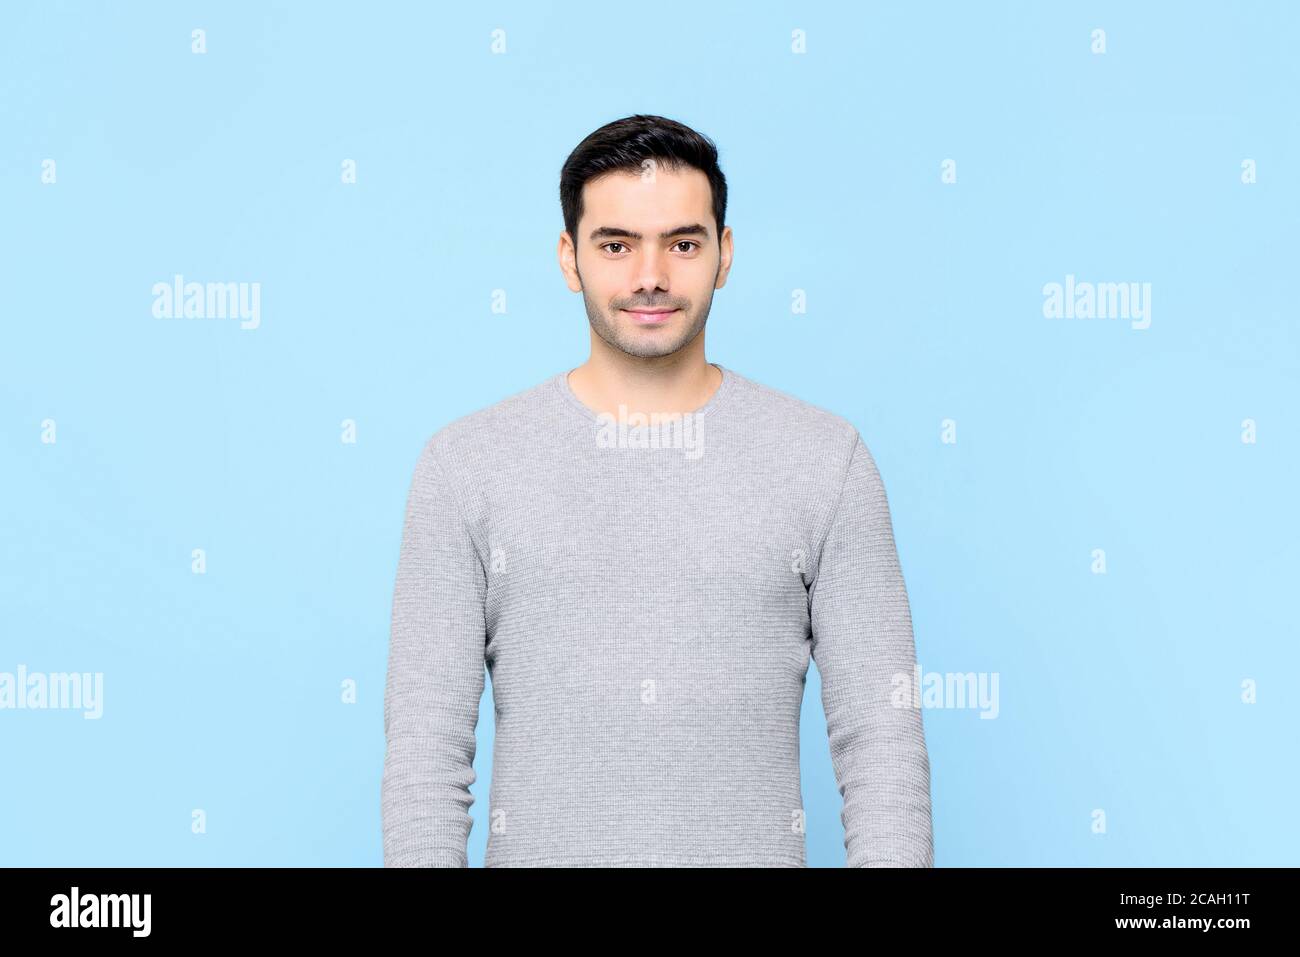 Waist up portrait of young handsome European man in plain gray t-shirt isolated on light blue studio background Stock Photo